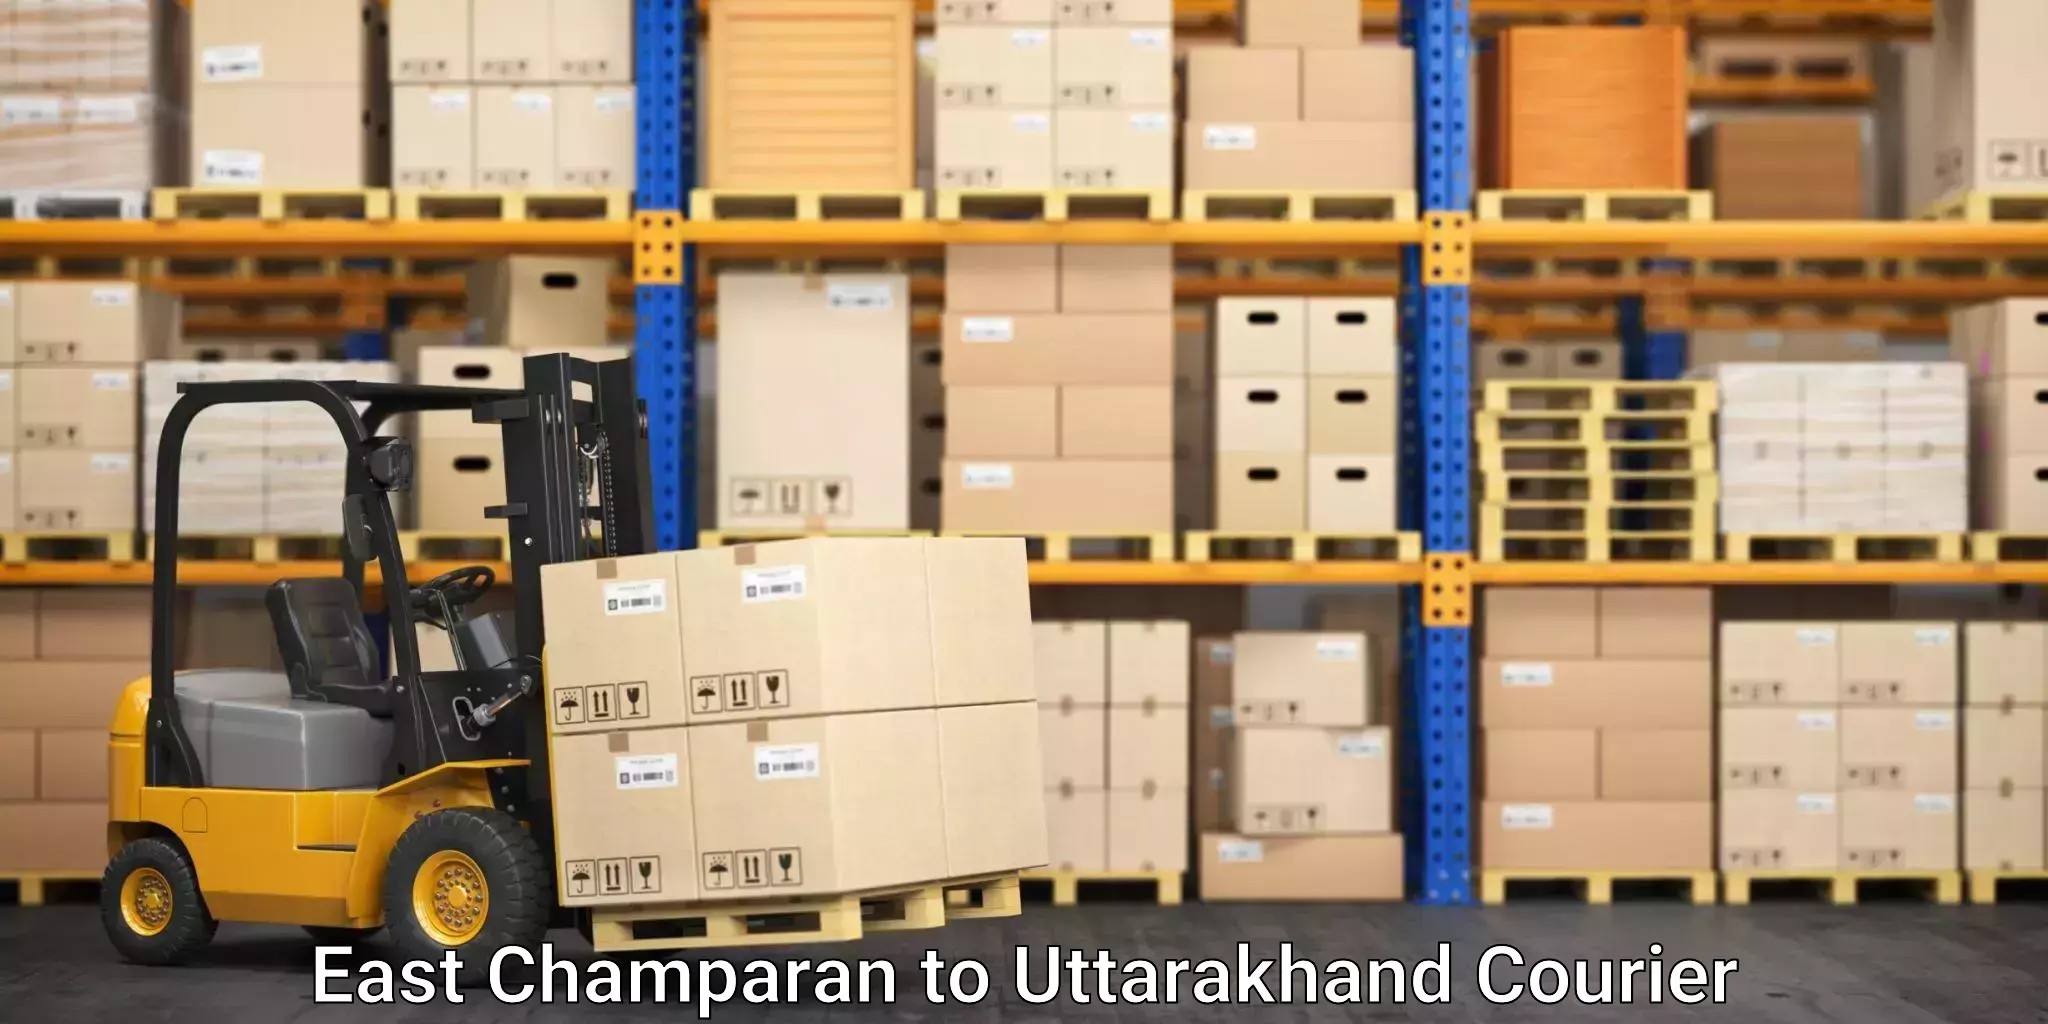 Furniture moving service East Champaran to Uttarakhand